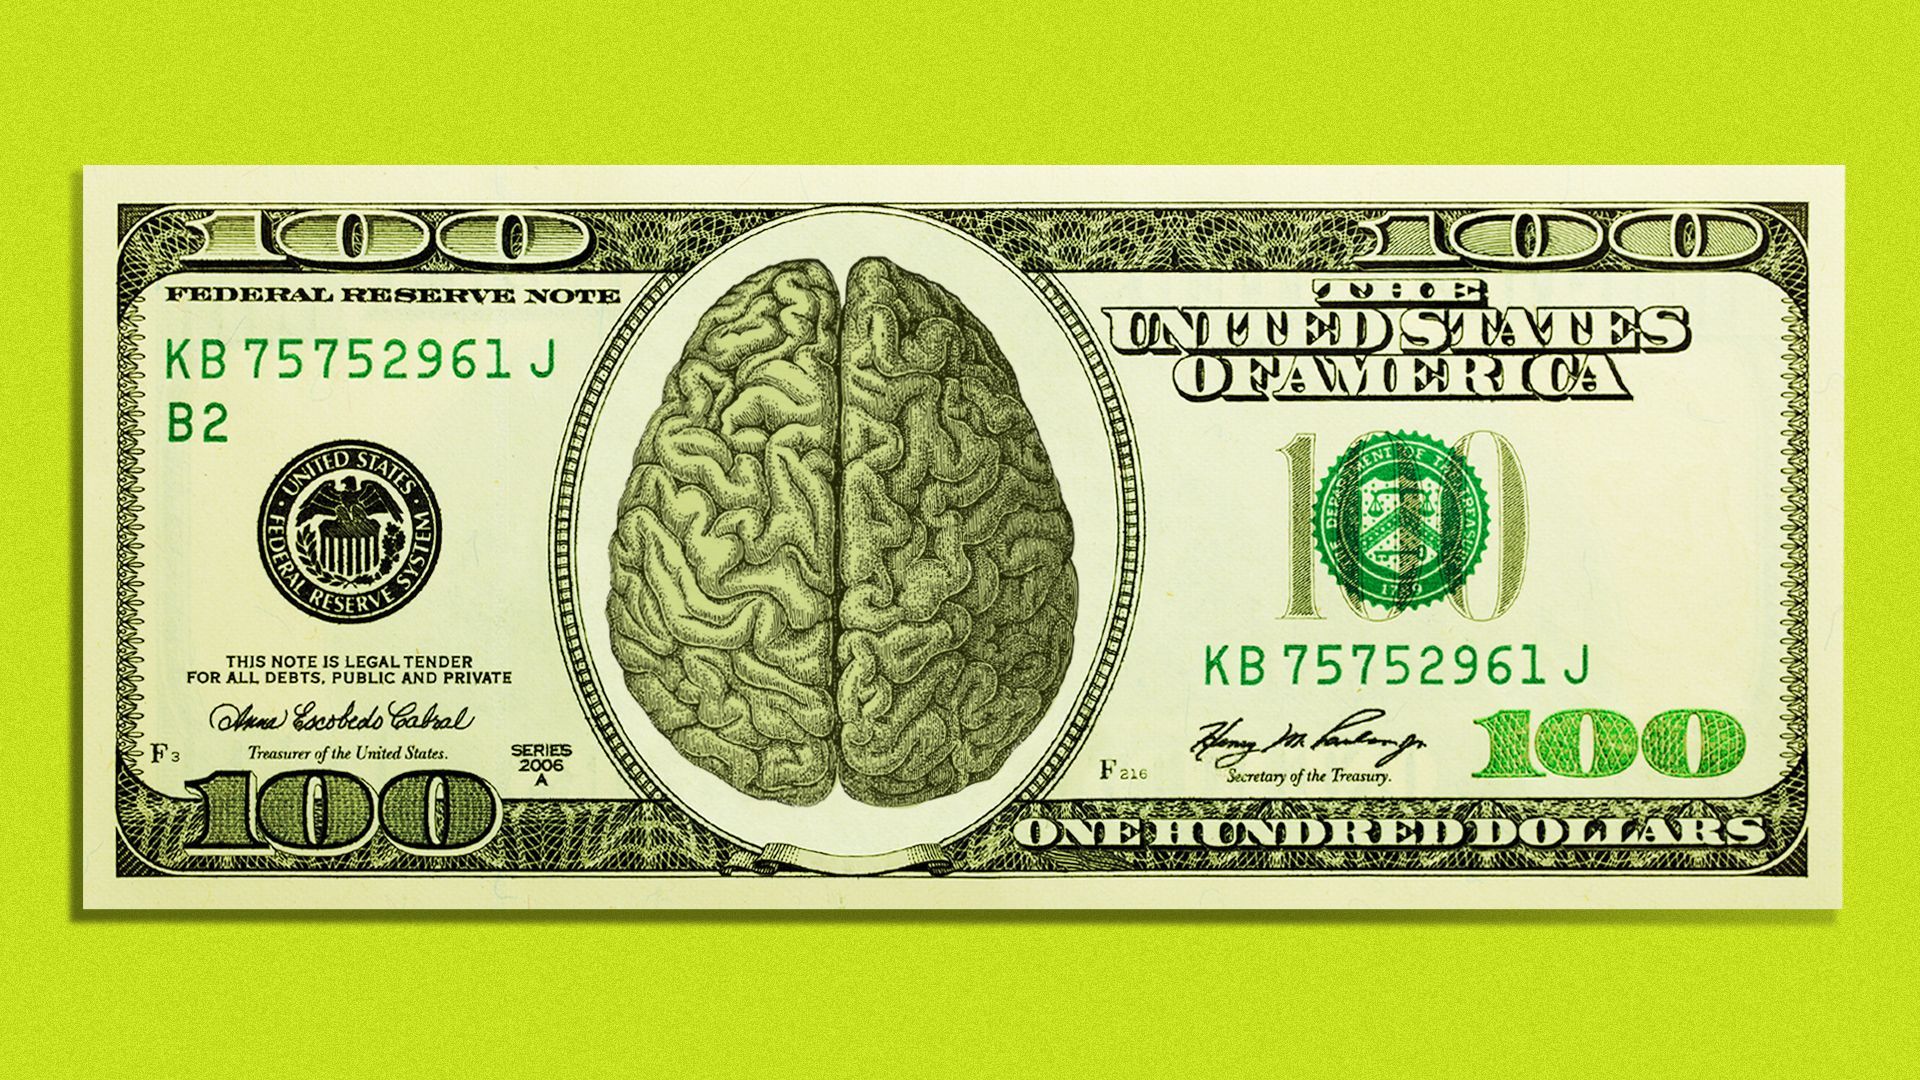 Illustration of a hundred dollar bill with a brain in place of Benjamin Franklin